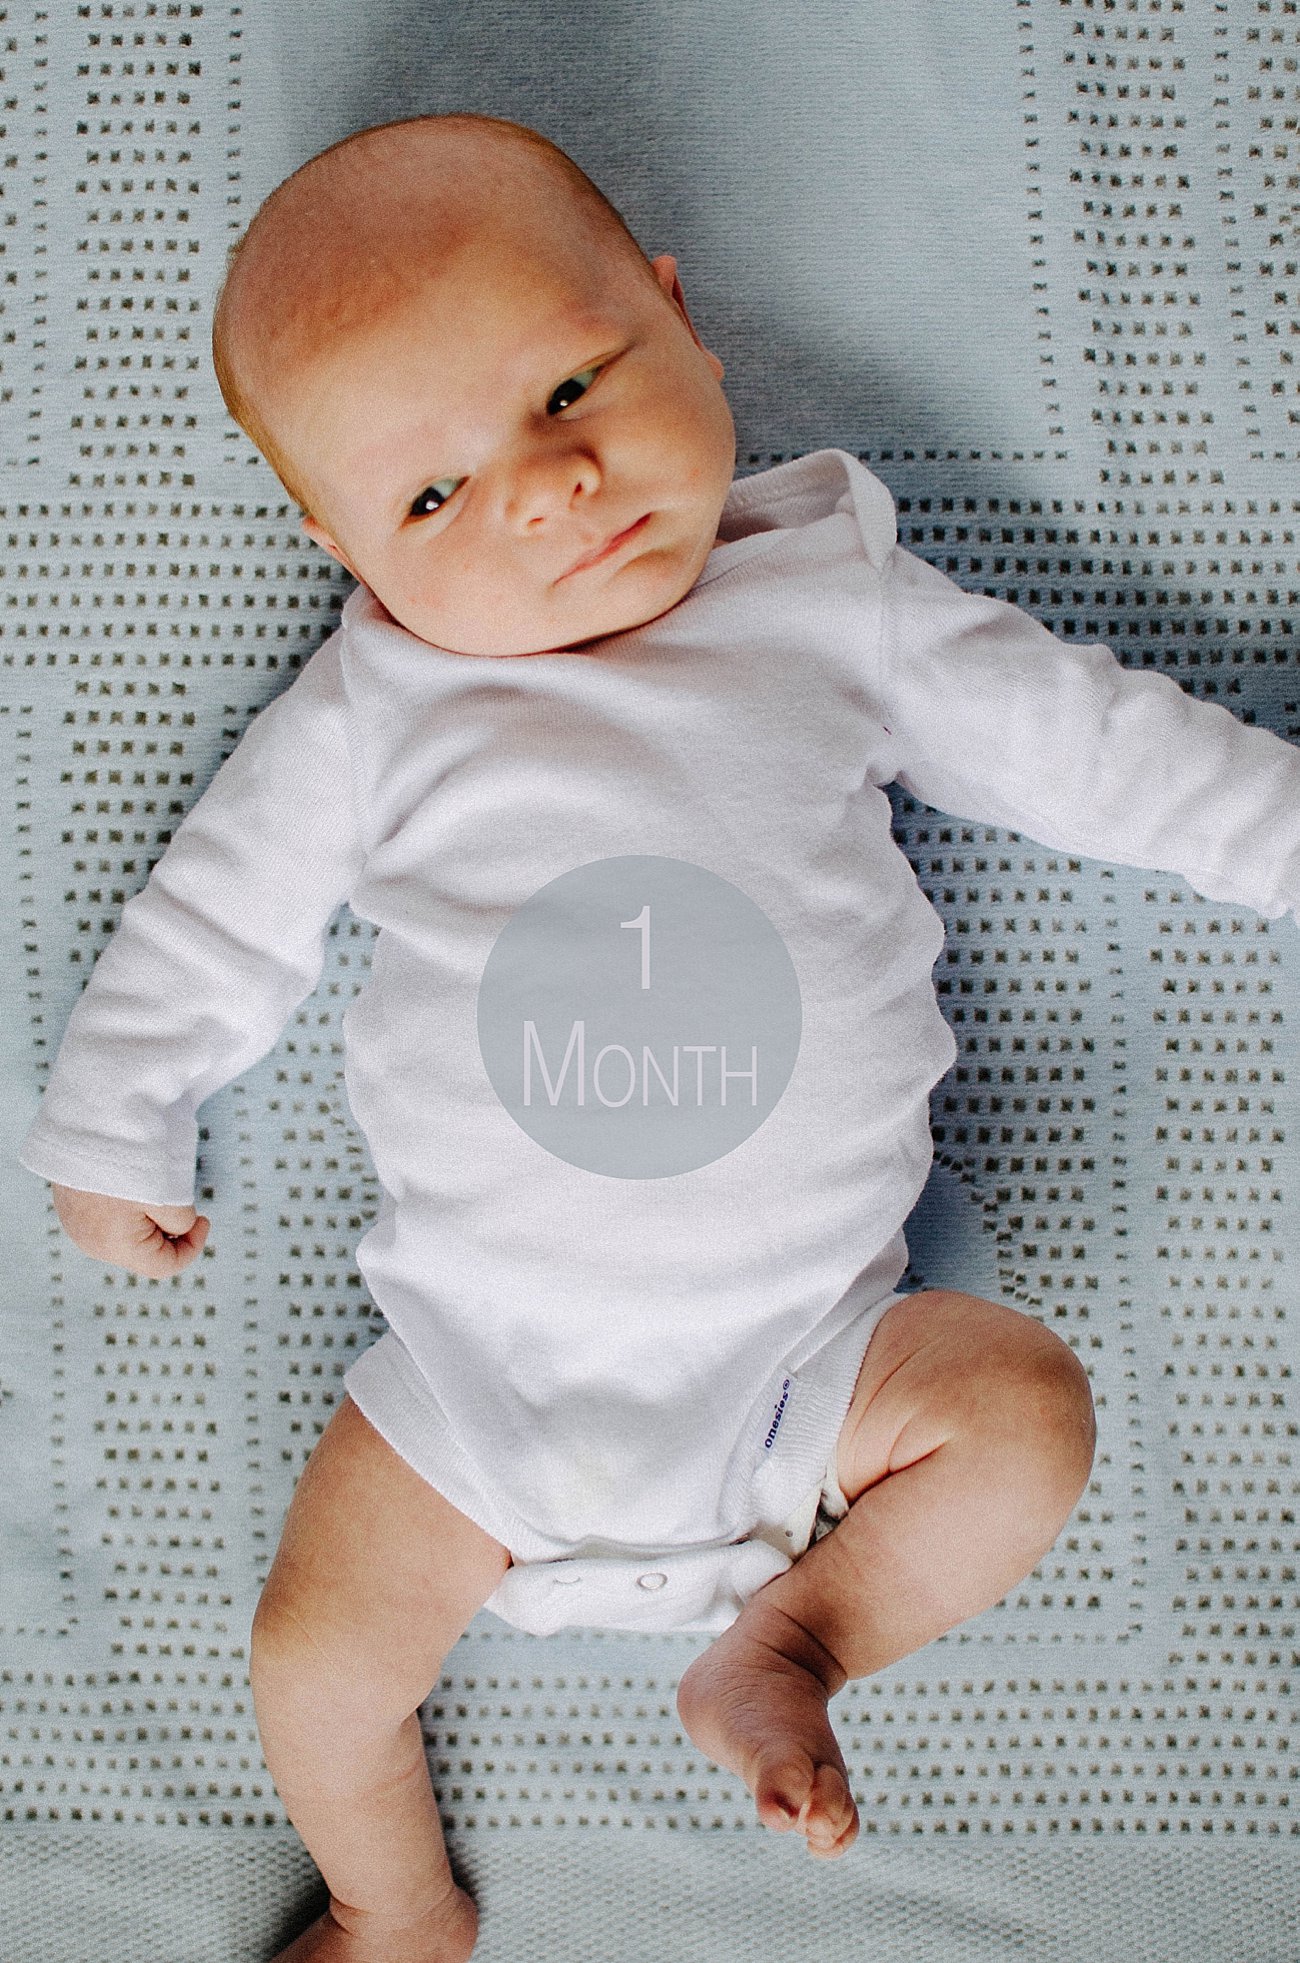 Amos James - One Month Old (14)